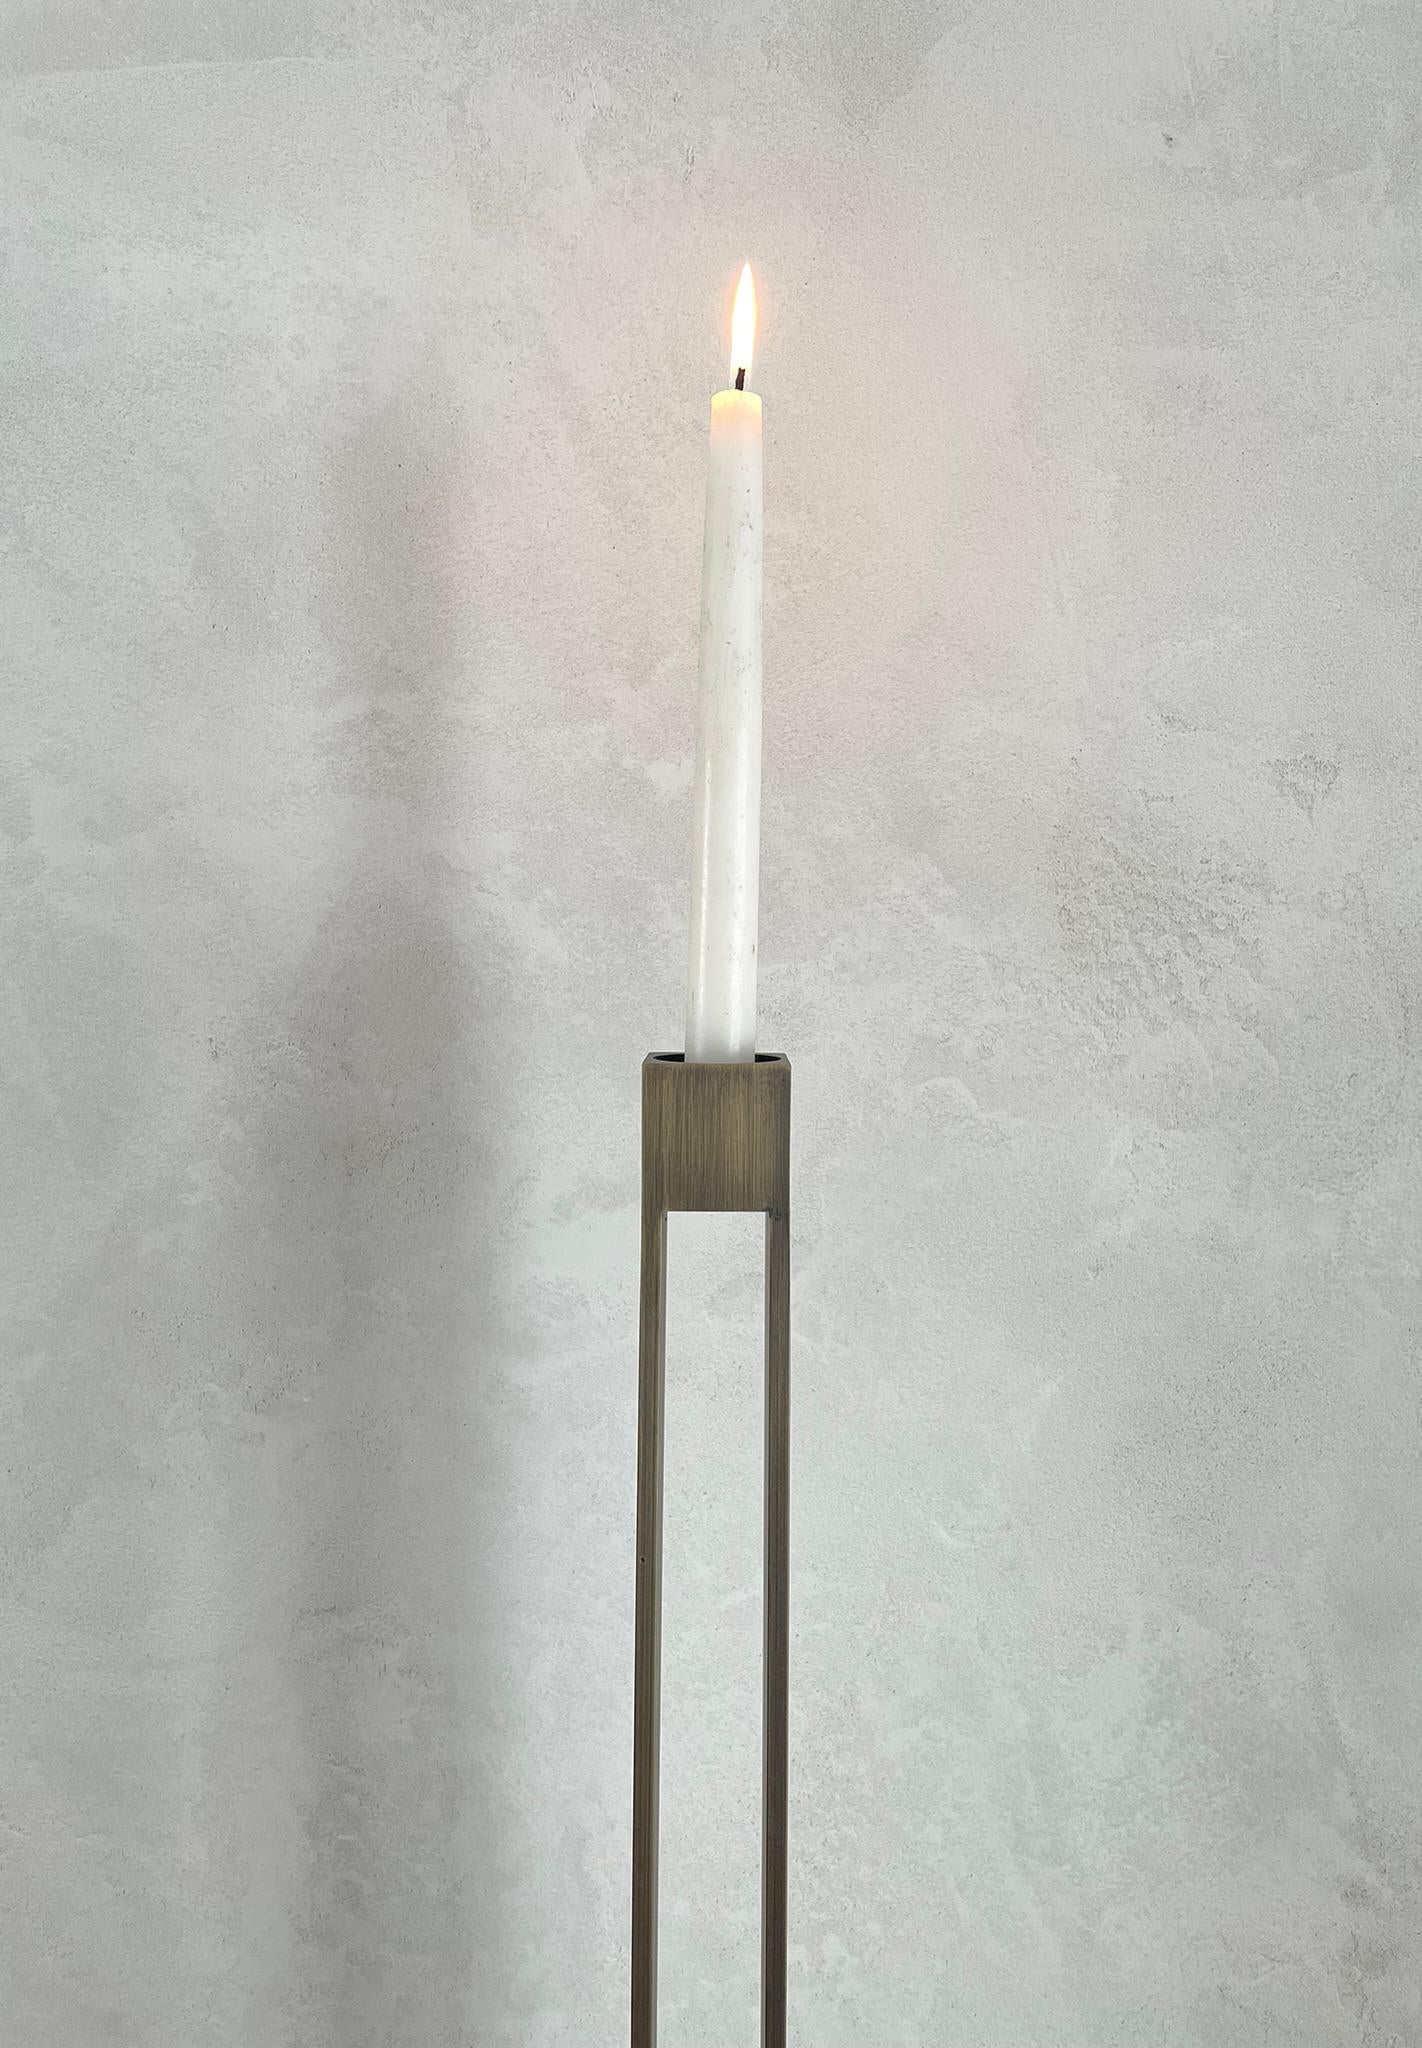 This stately candle holder is designed to accommodate either tea lights or taper candles. Depending upon your viewing angle, the tall metal candle holders can seem either light and open, or solid and rooted. Both modern and timeless, the Parallel